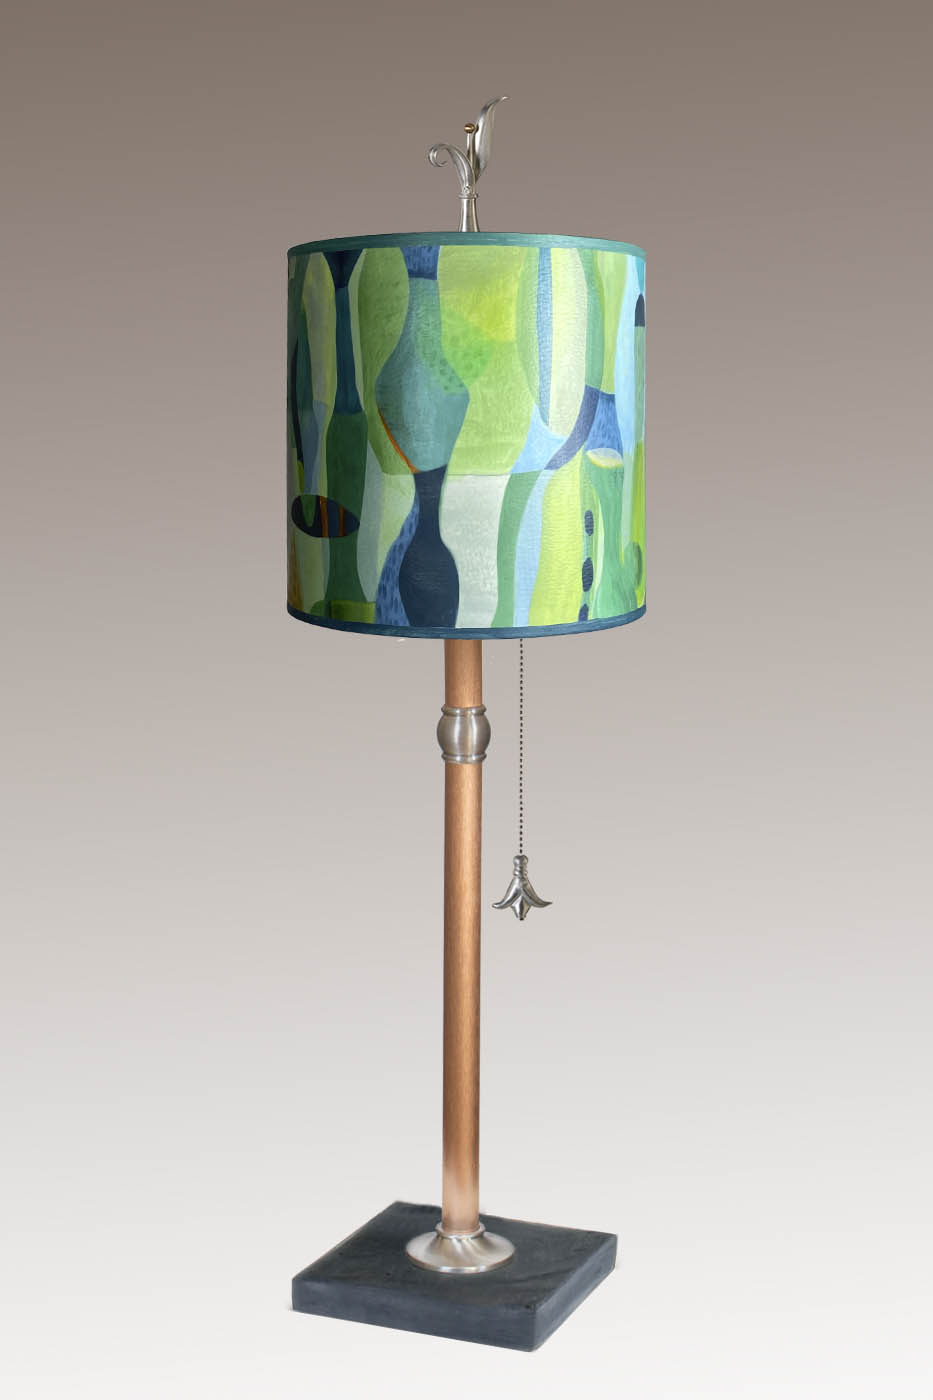 Janna Ugone & Co Table Lamp Copper Table Lamp with Medium Drum Shade in Riviera in Citrus